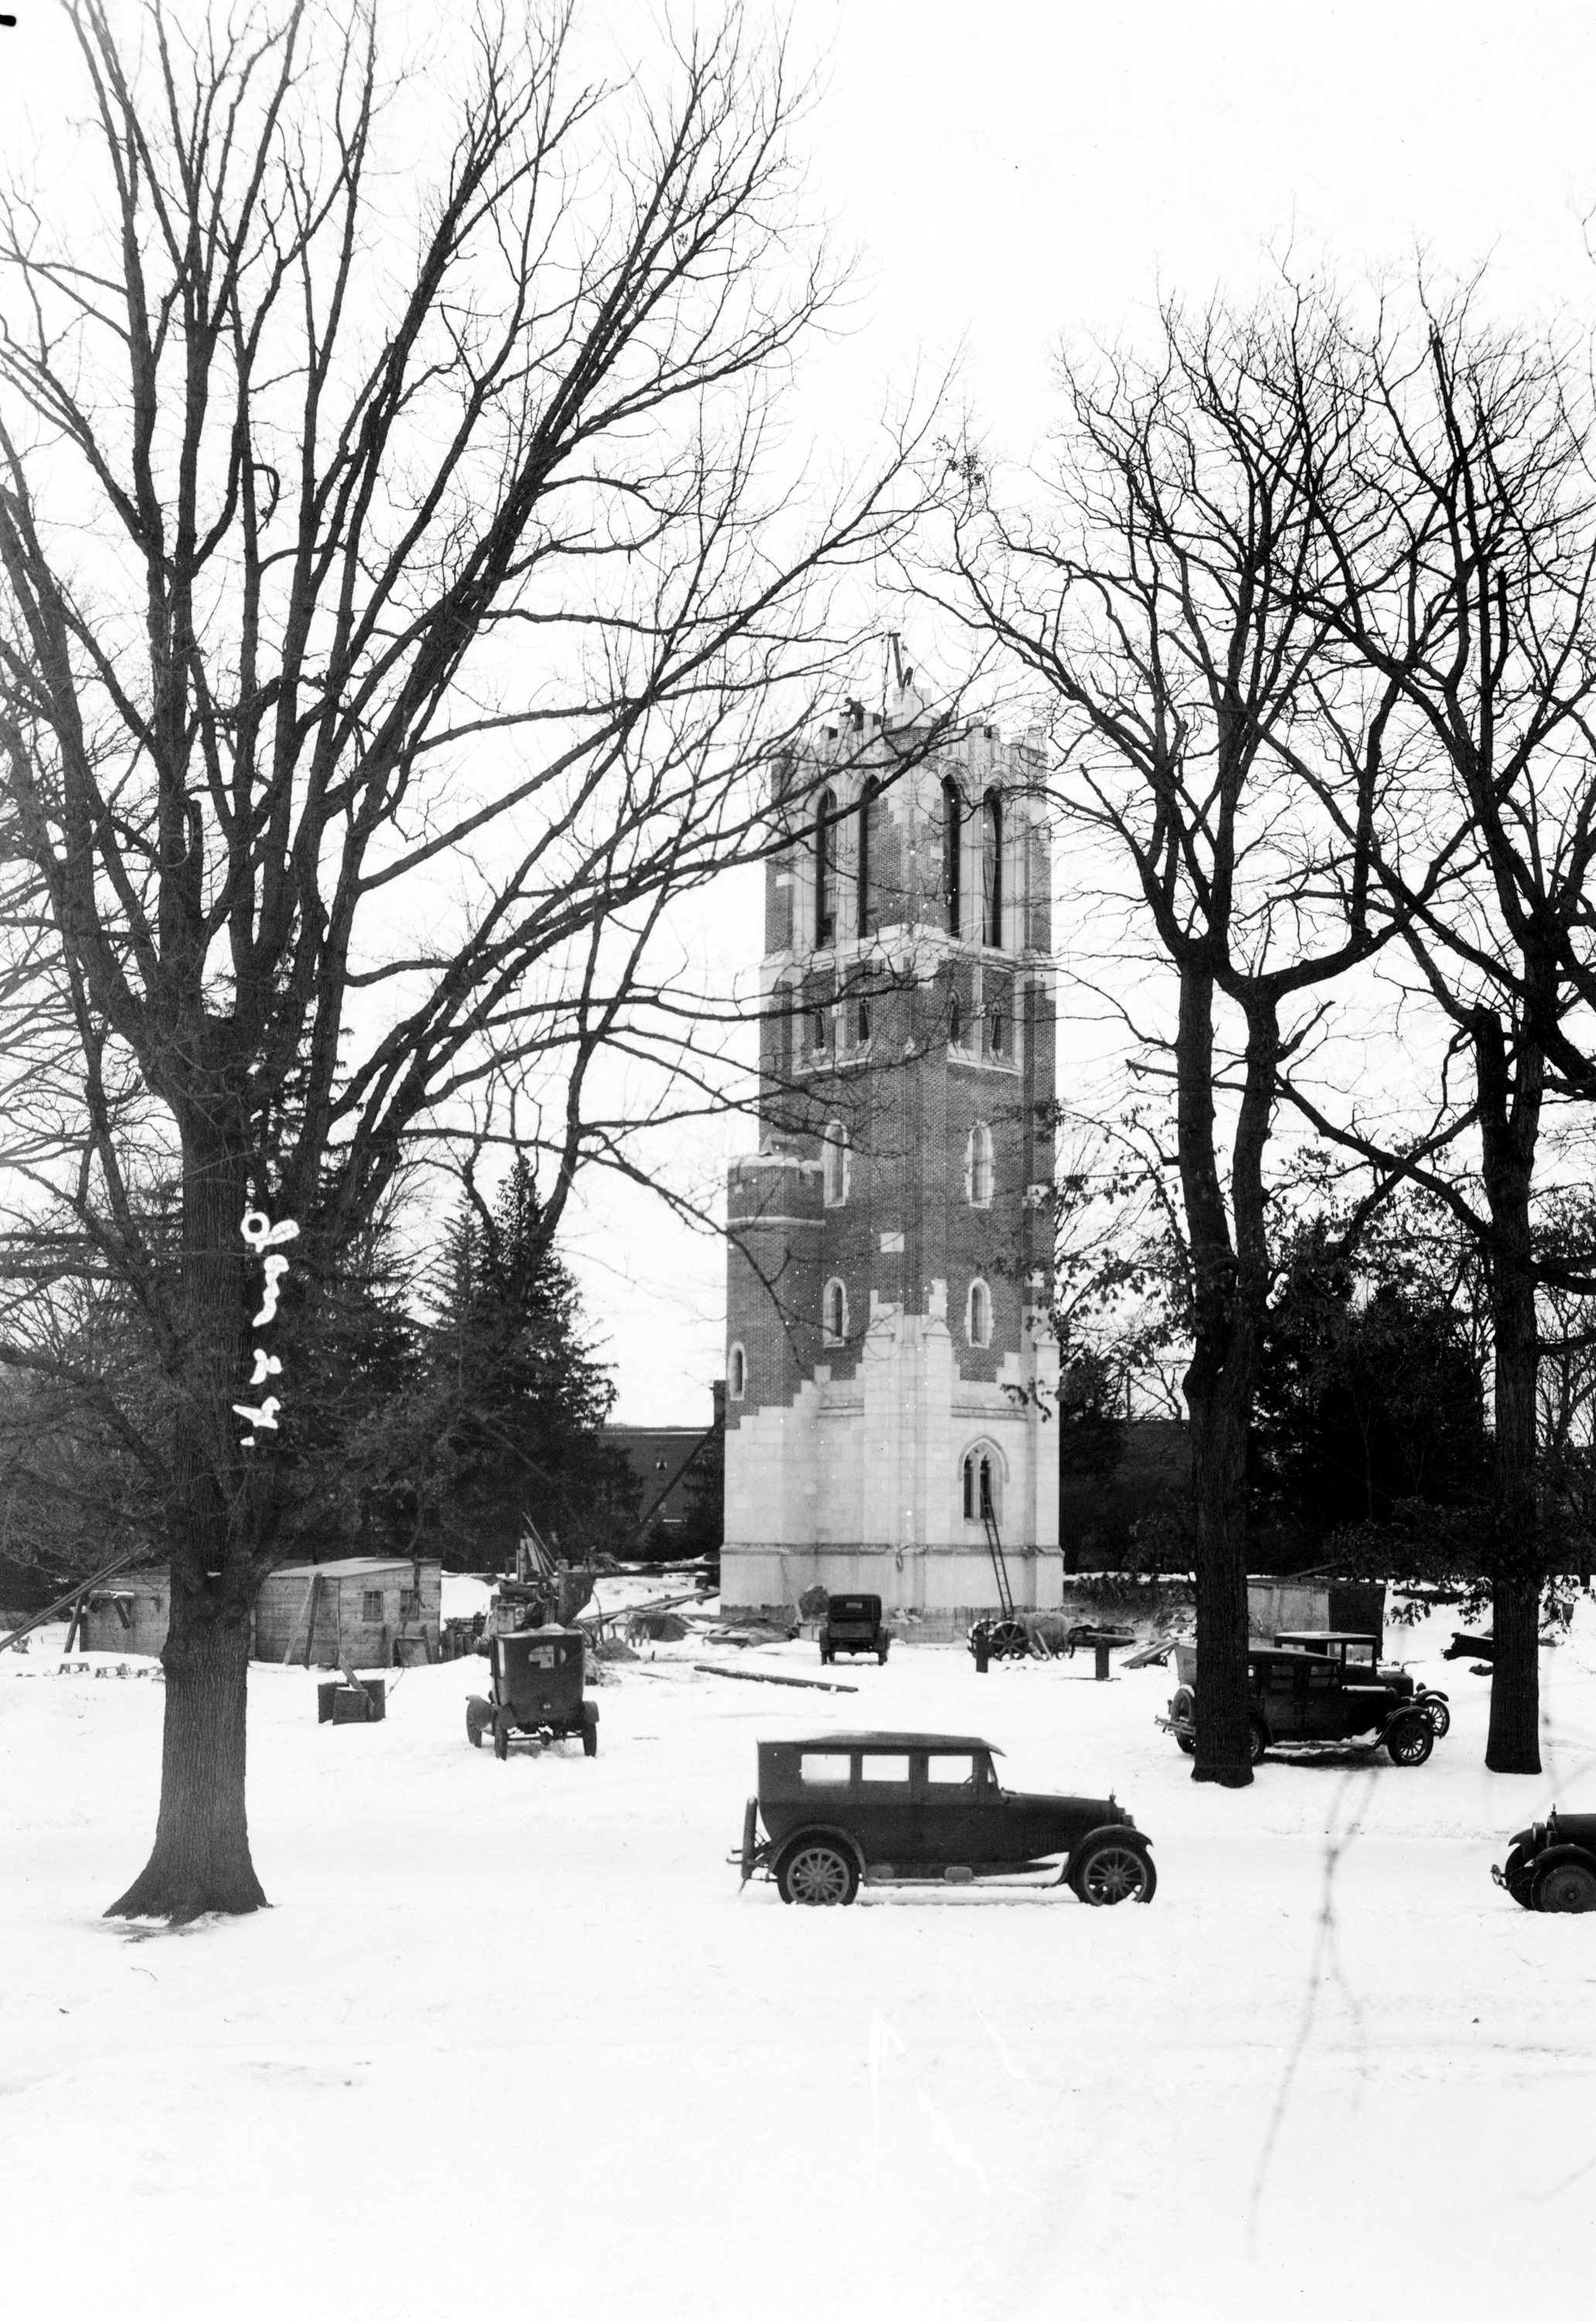 Construction at Beaumont Tower, 1928